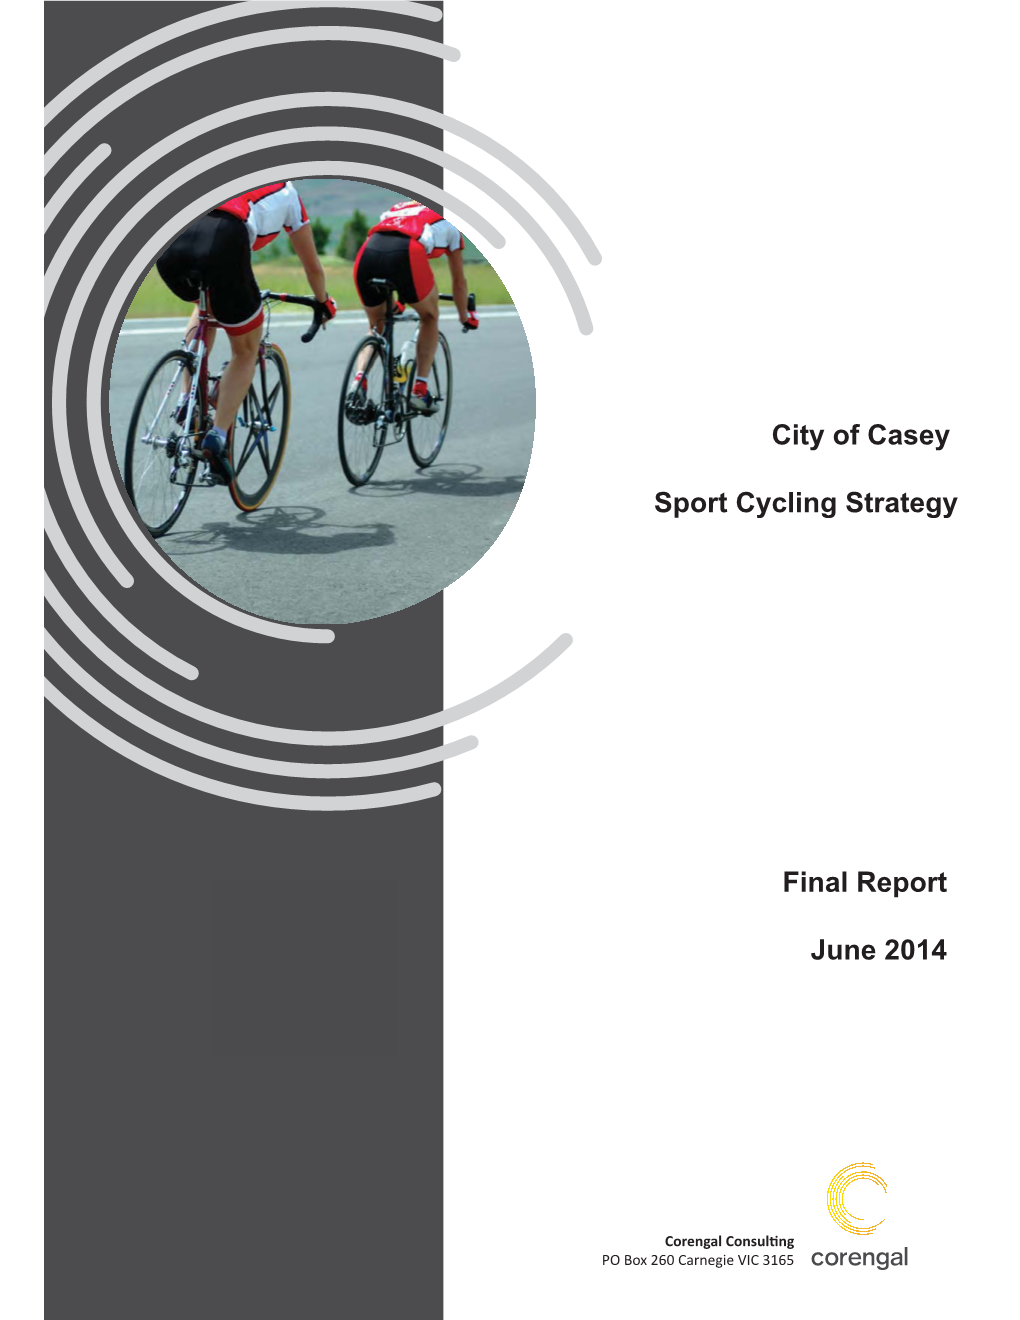 City of Casey Sport Cycling Strategy Final Report June 2014